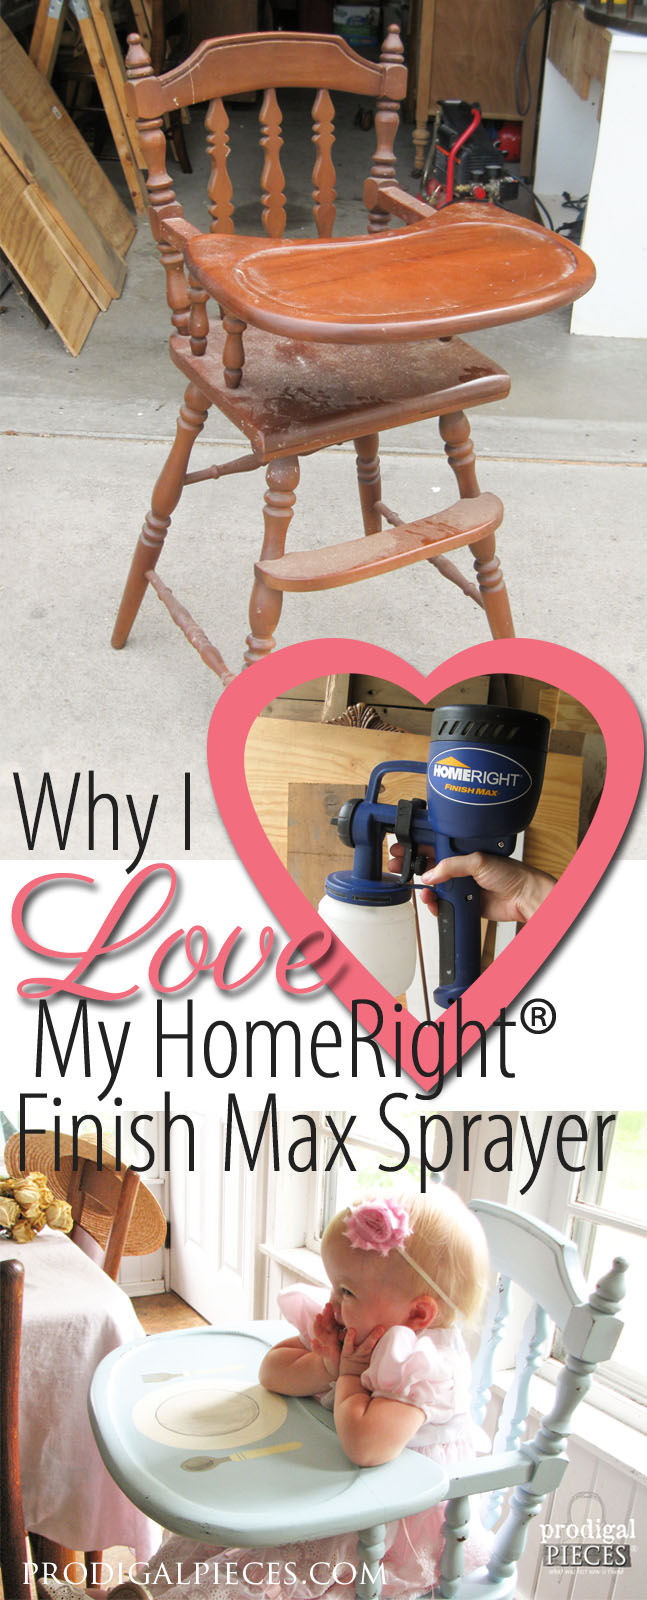 Why I Love My HomeRight Finish Max Paint Sprayer by Prodigal Pieces | www.prodigalpieces.com